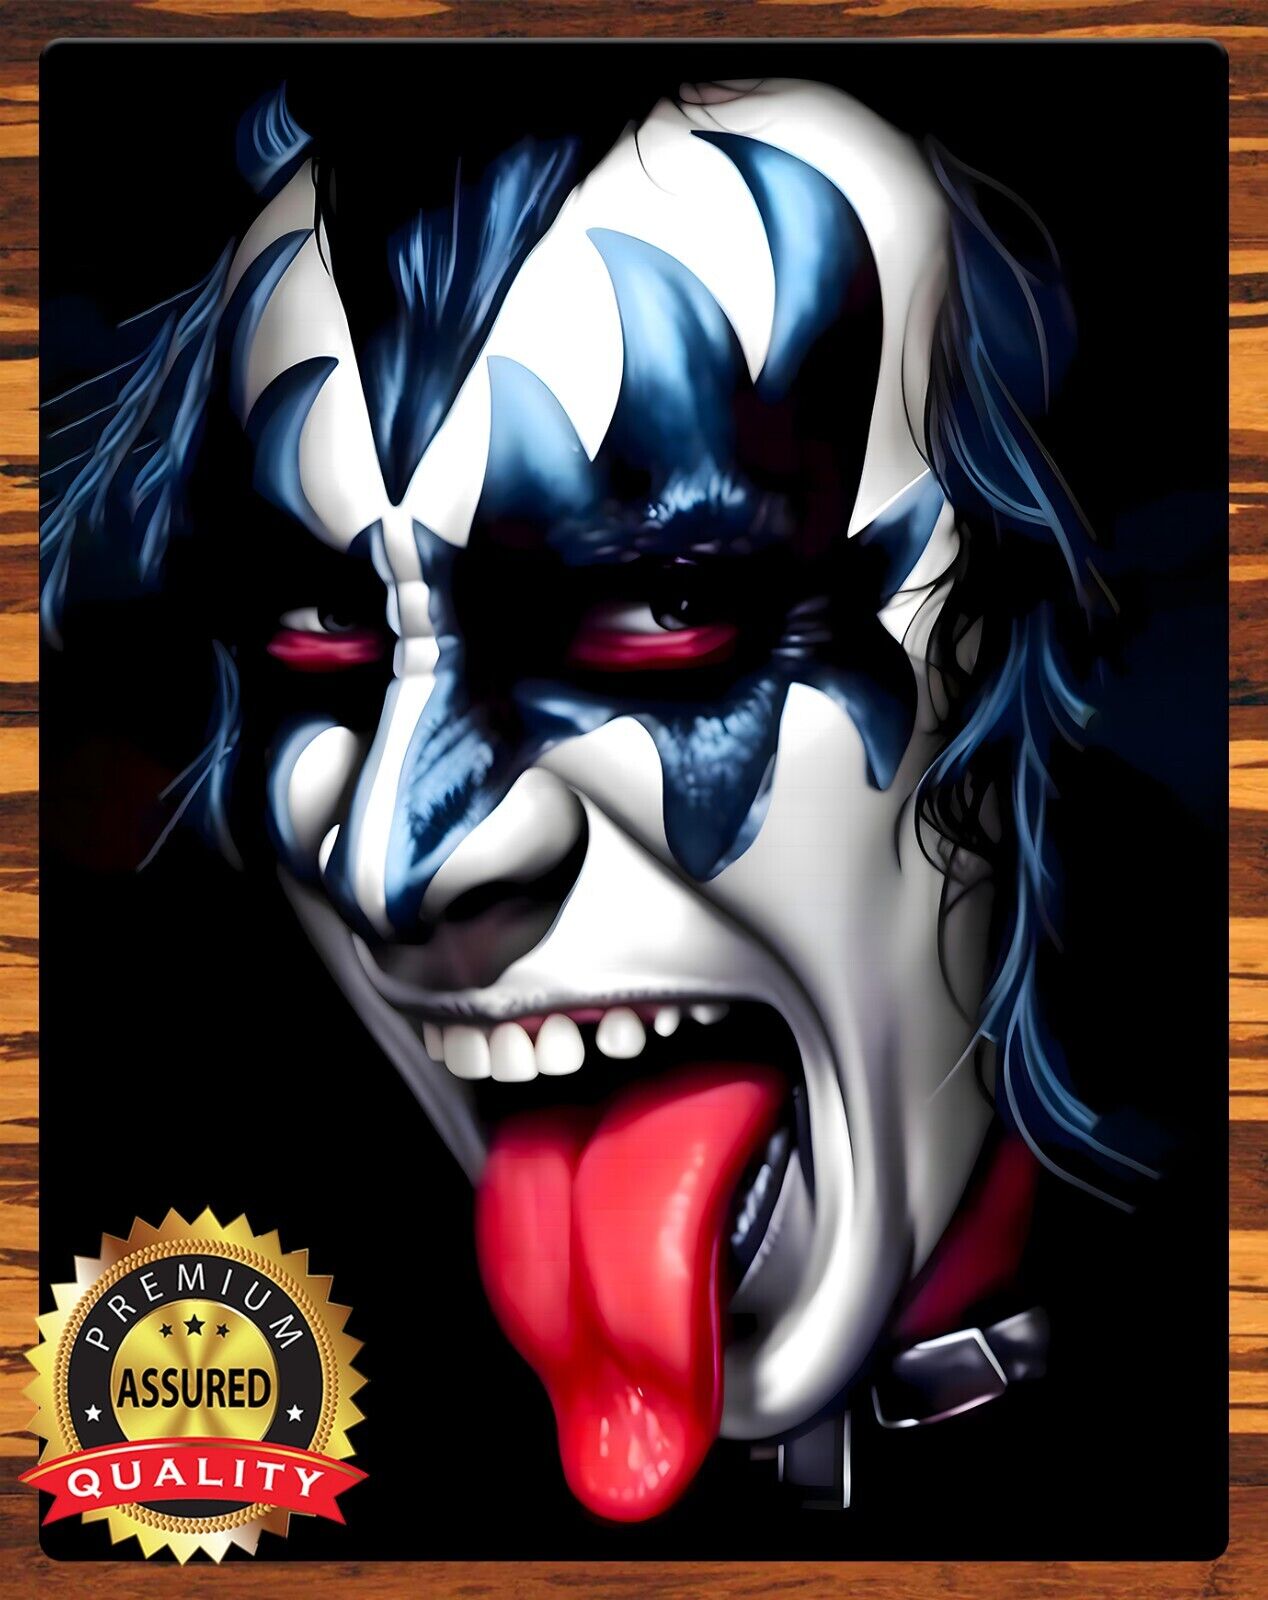 Gene Simmons - Kiss - To Be Signed By Artist - Metal Sign 11 x 14